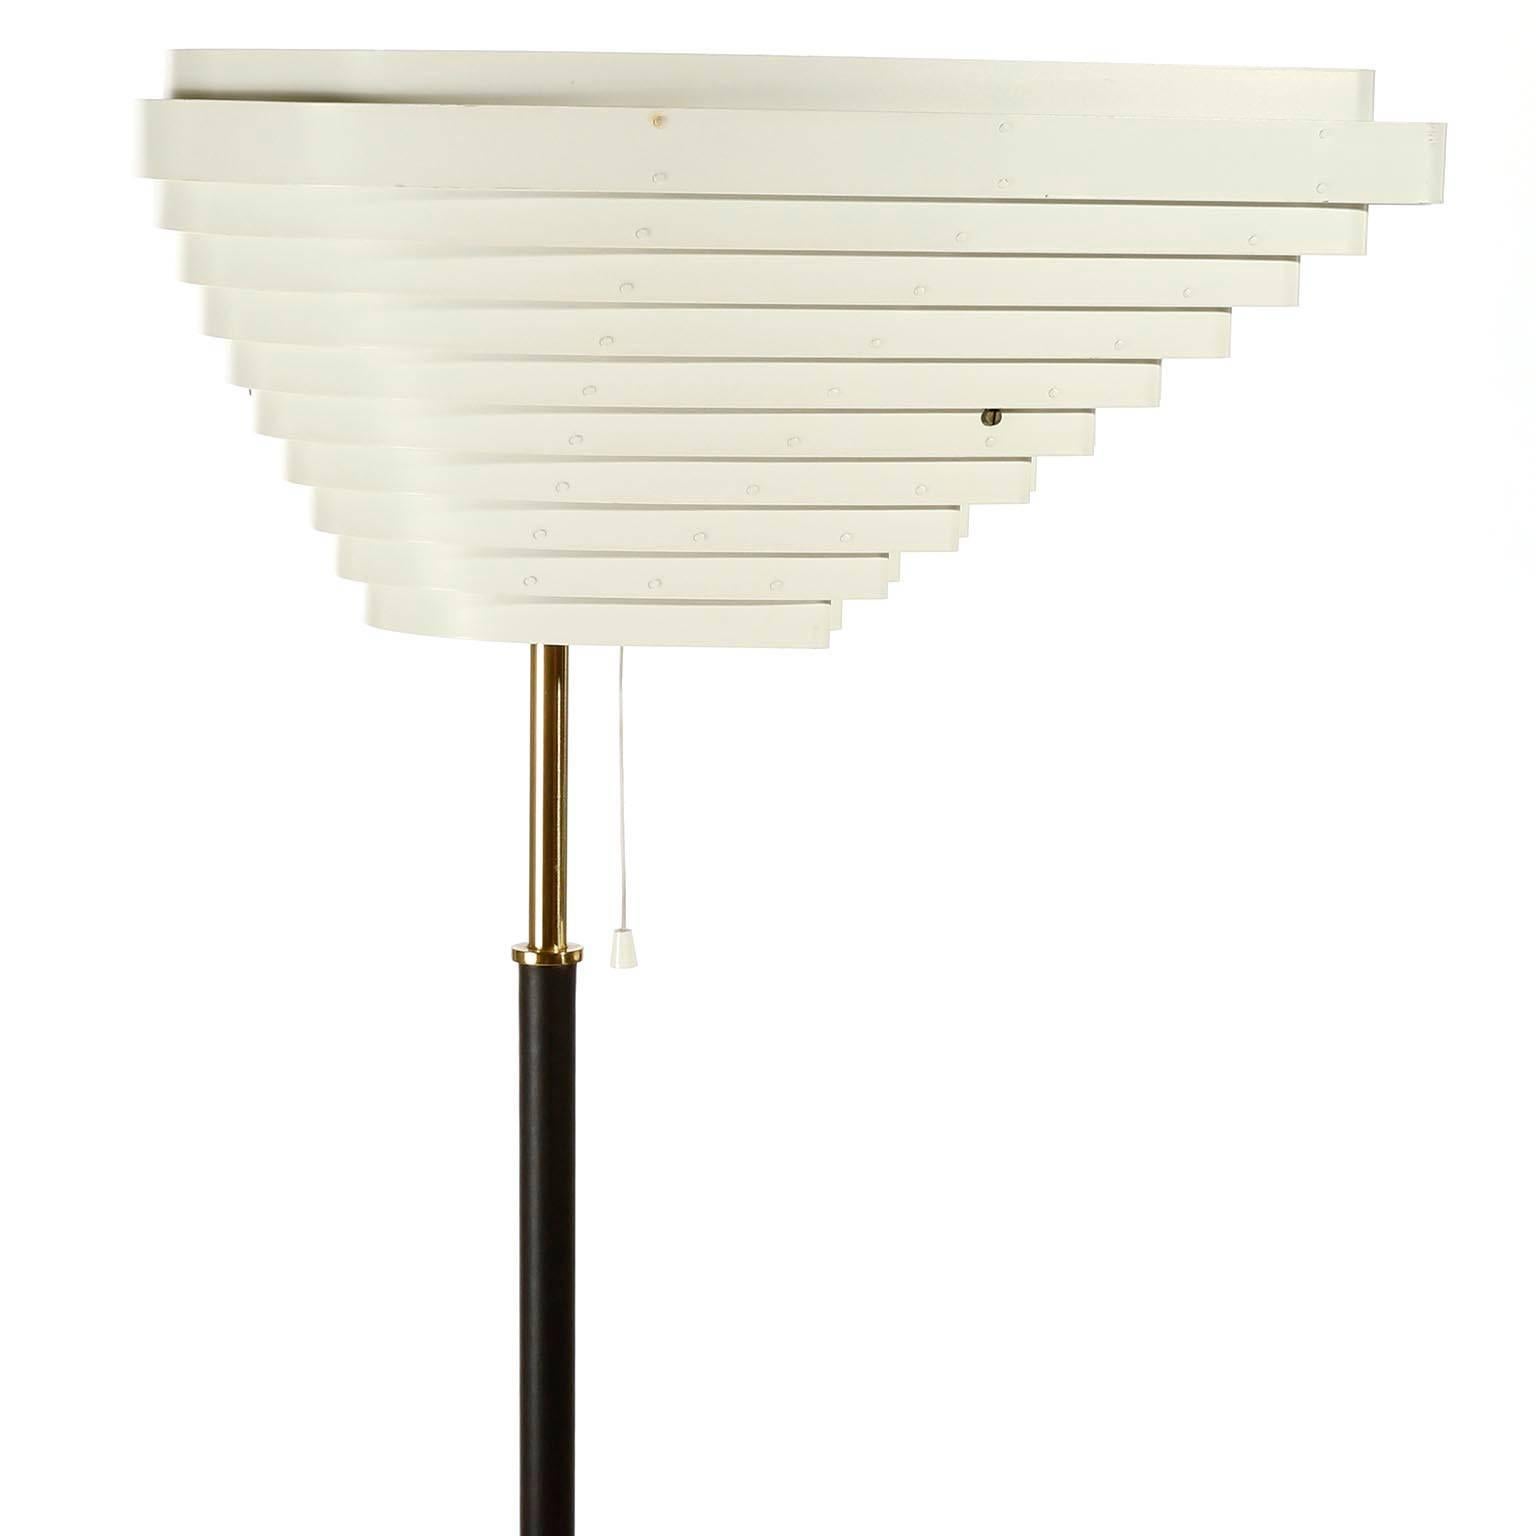 An early floor lamp model A805 'Angel Wing' designed by Alvar Aalto for Valaisinpaja Oy, Finland, manufactured in midcentury, circa 1954. The light originally was designed for the National Pensions Institute in Helsinki. 
Base and stem are wrapped